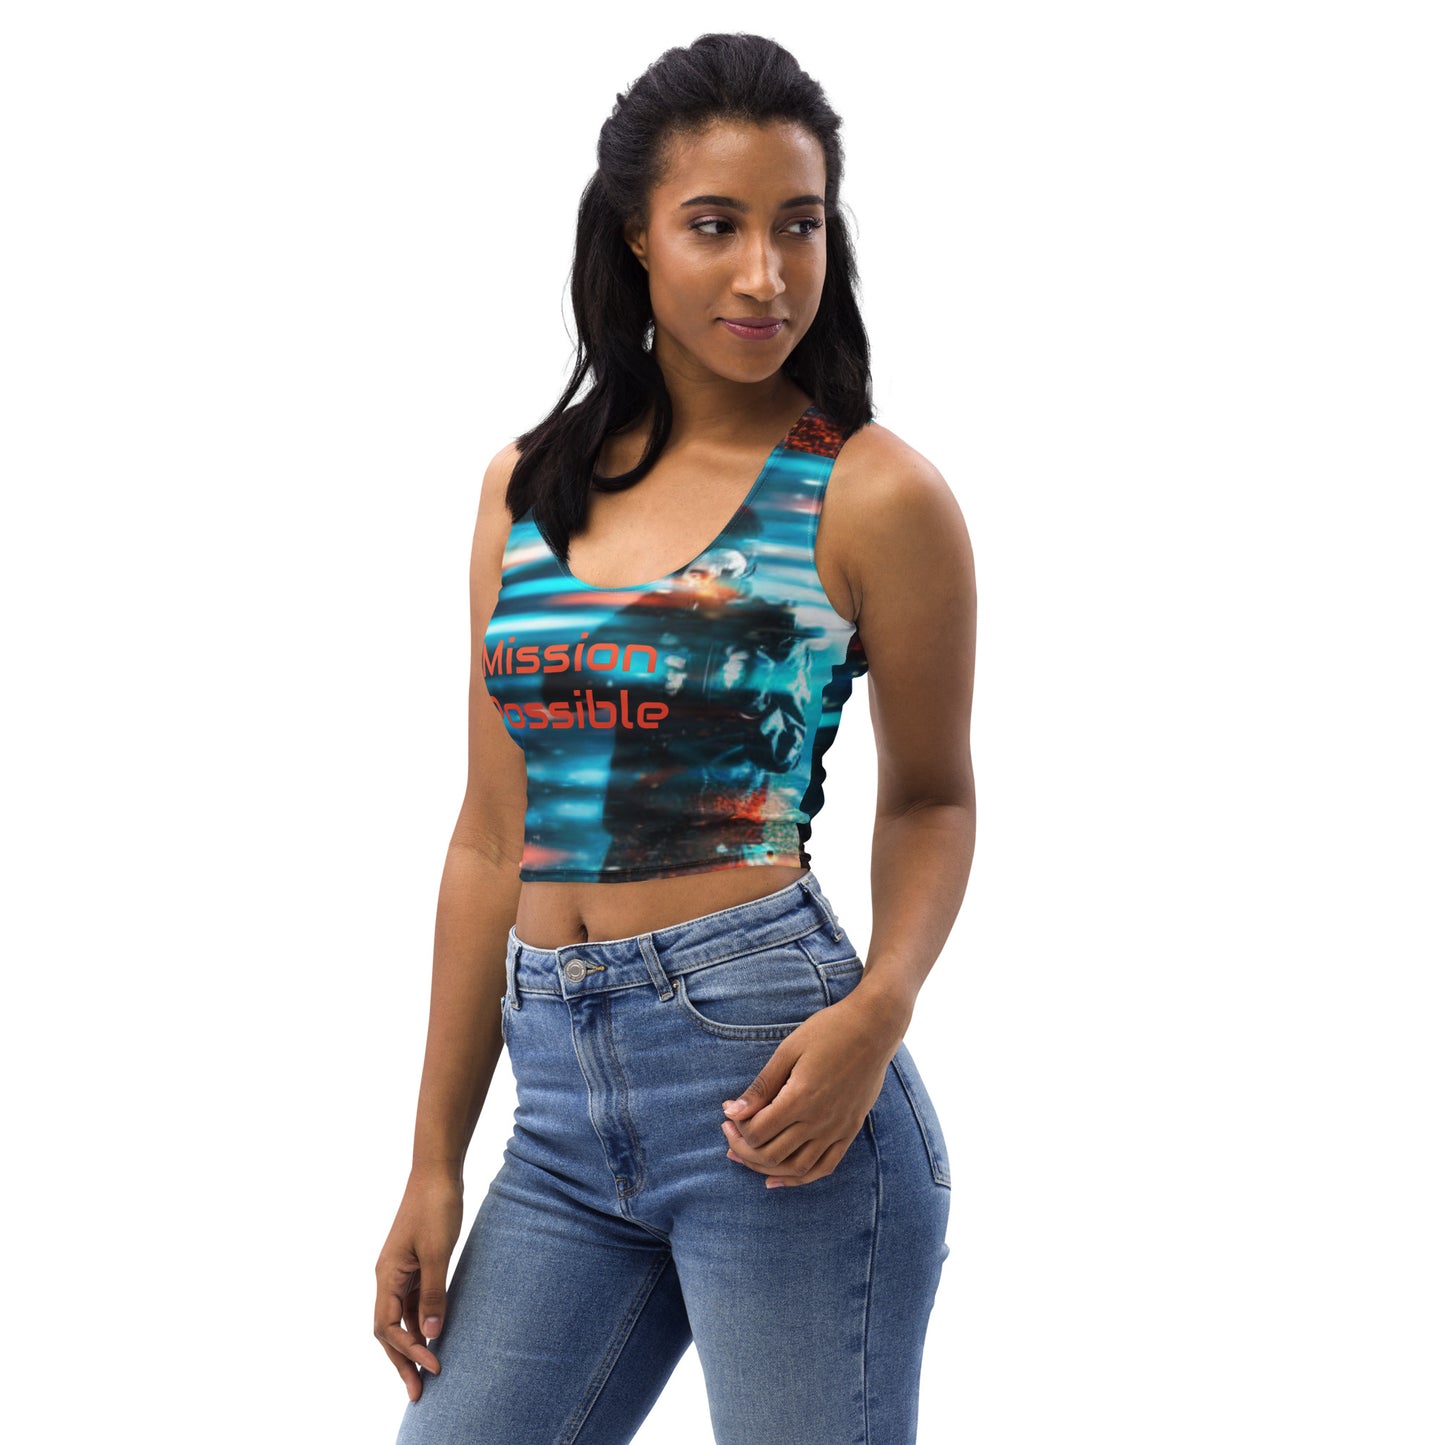 Mission Possible-Crop Top